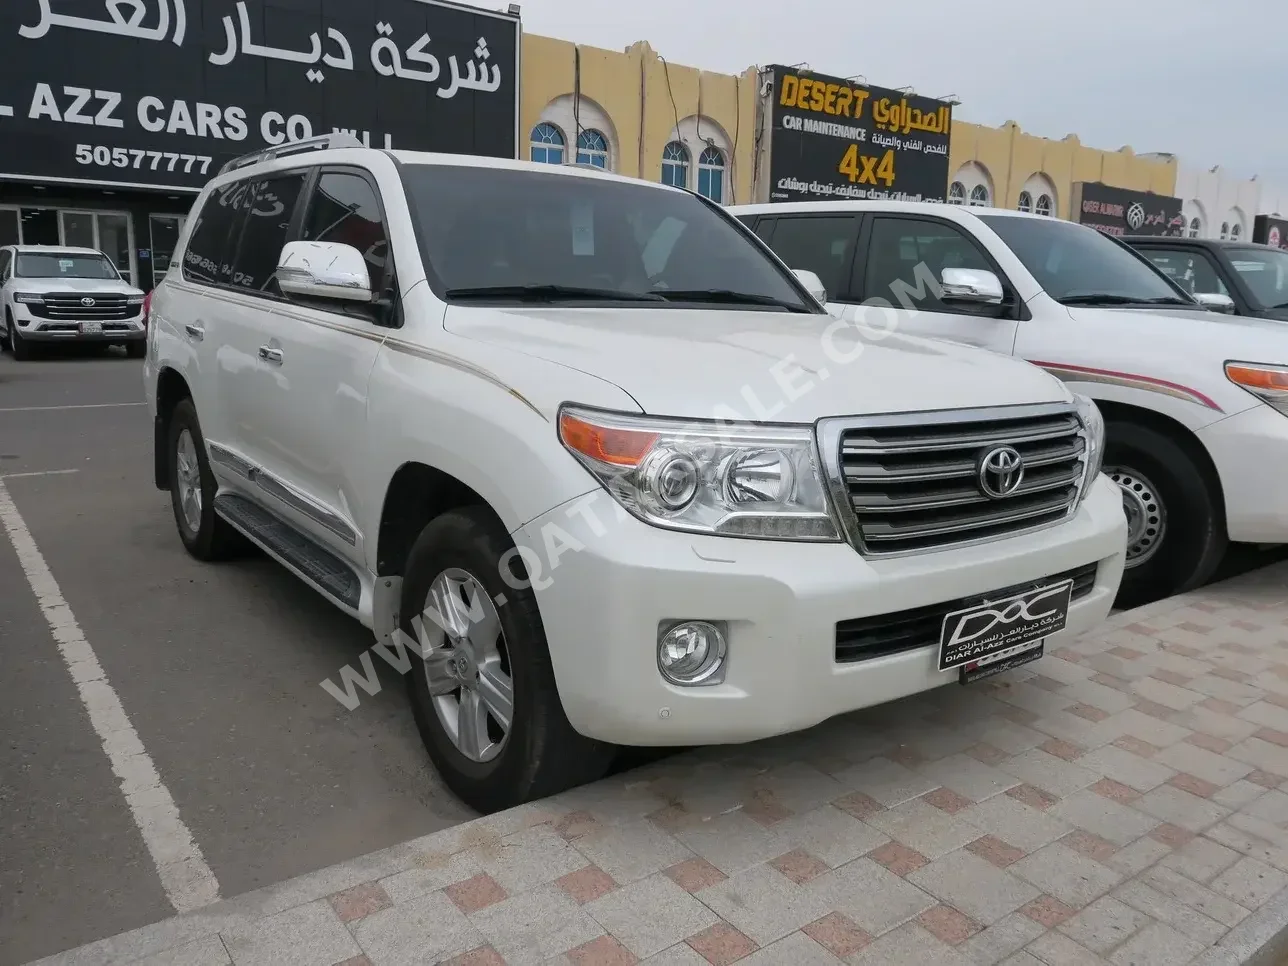 Toyota  Land Cruiser  GXR  2015  Automatic  154,000 Km  8 Cylinder  Four Wheel Drive (4WD)  SUV  Pearl